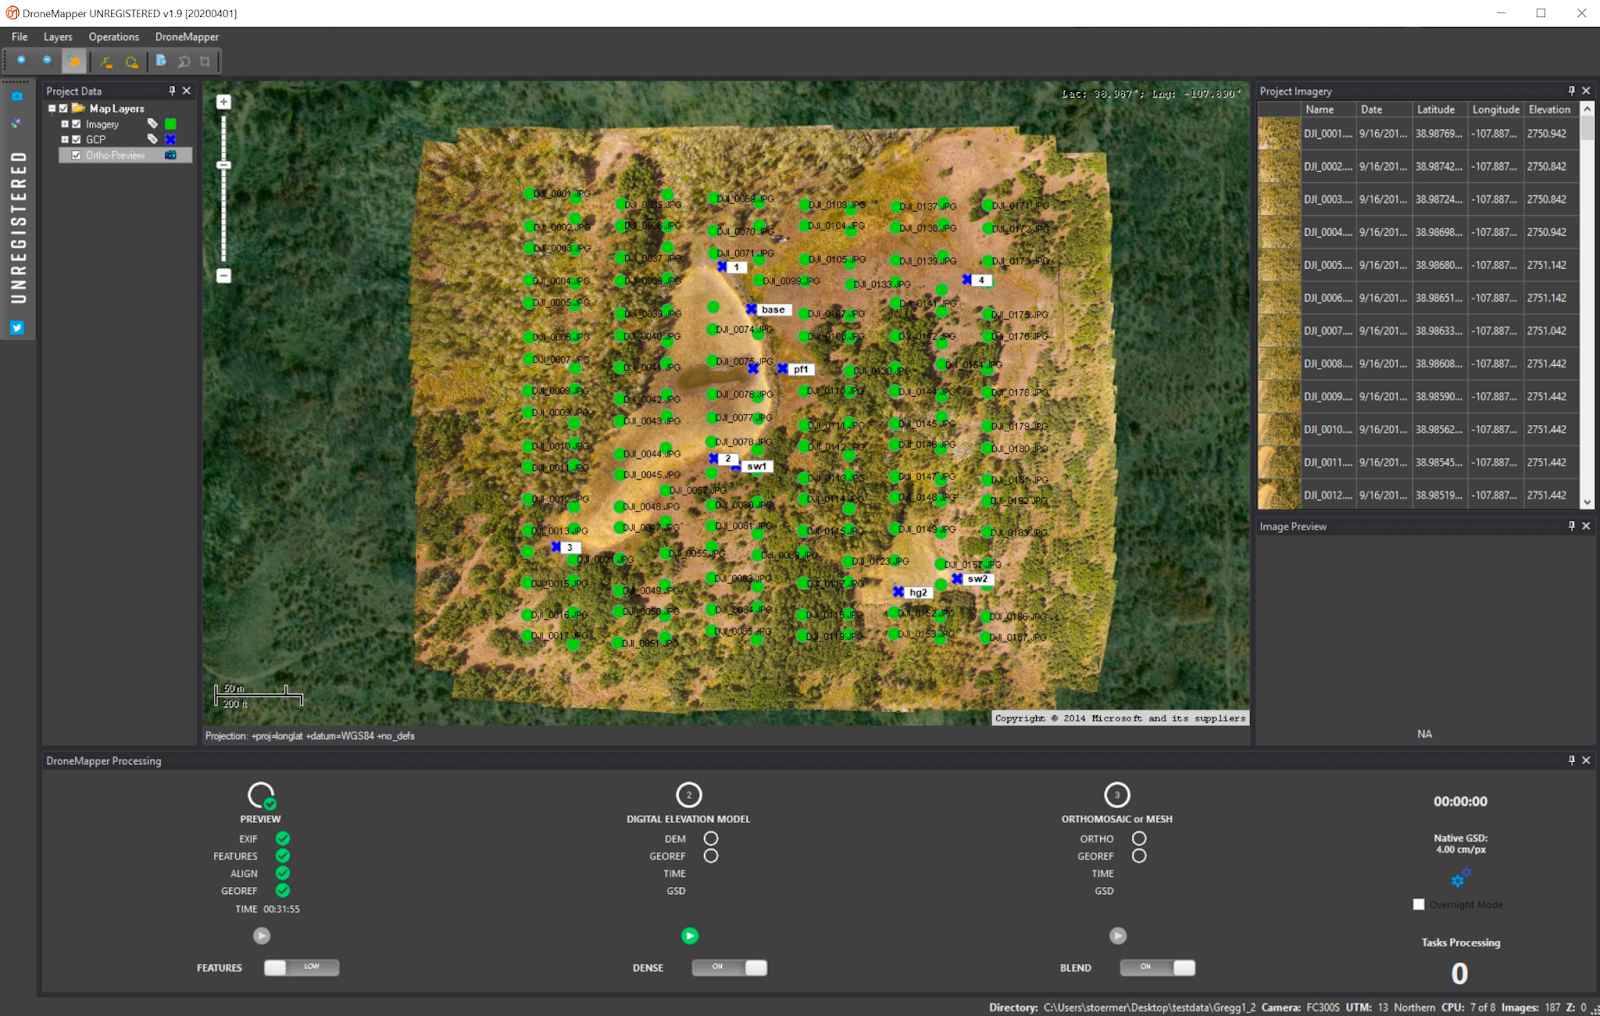 Drone mapping software